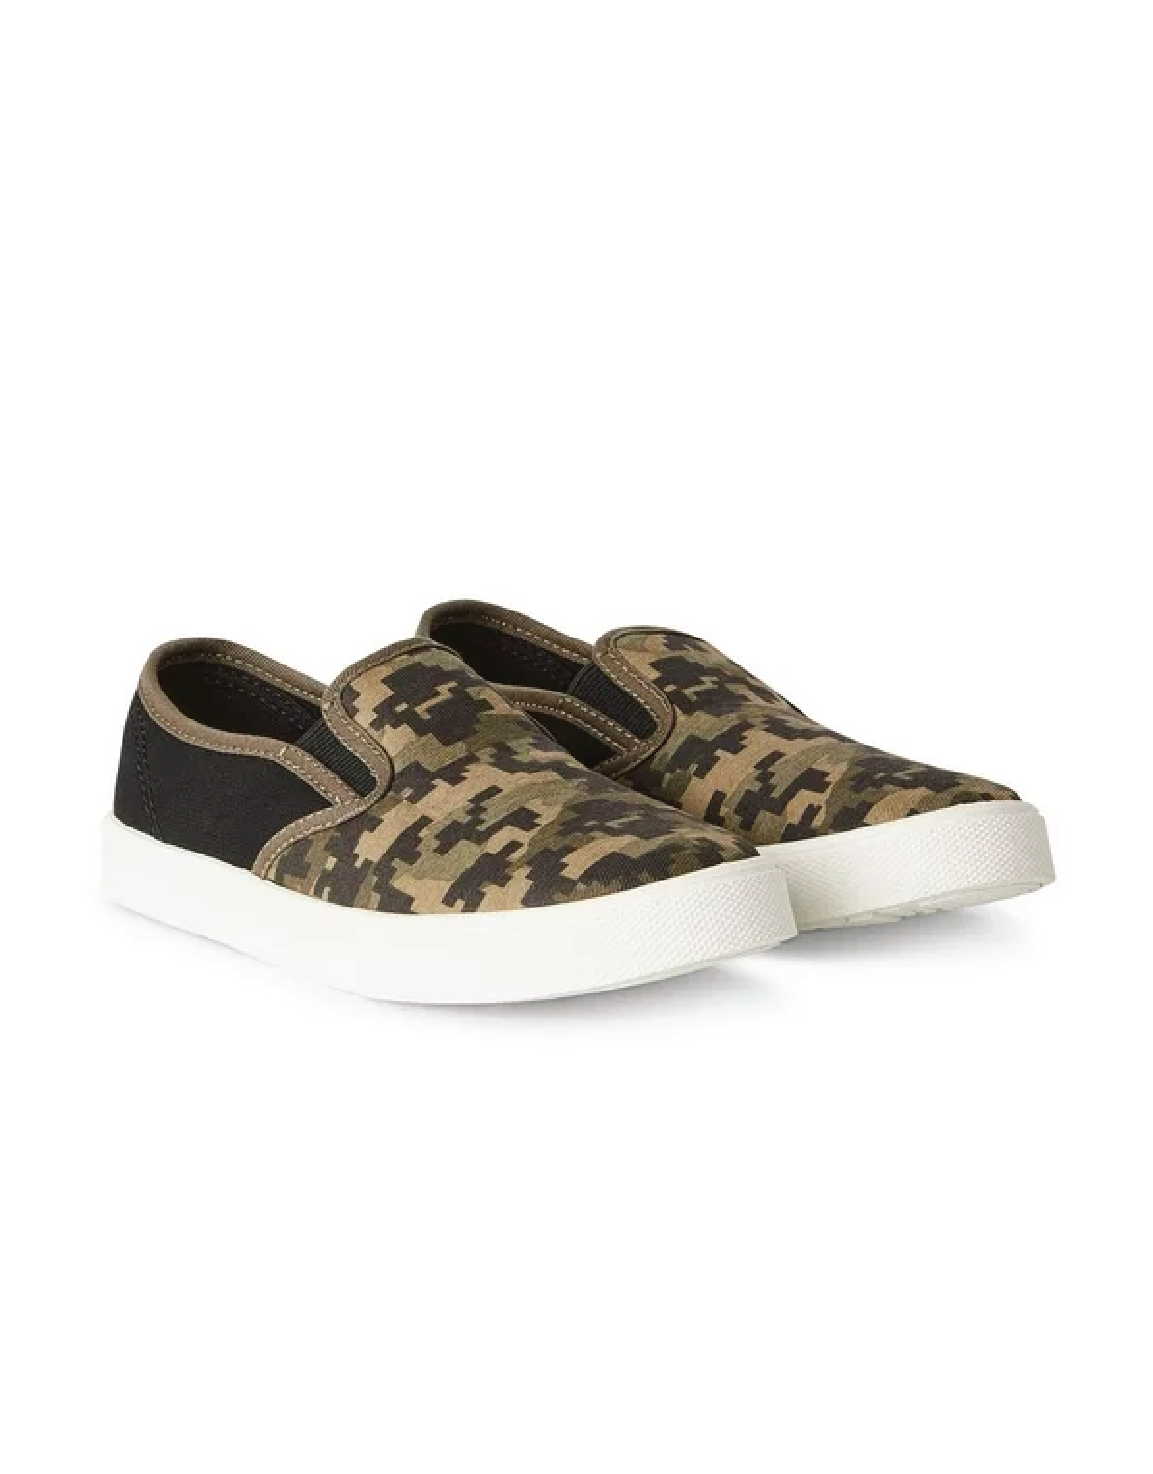 slip on camo printed shoes 